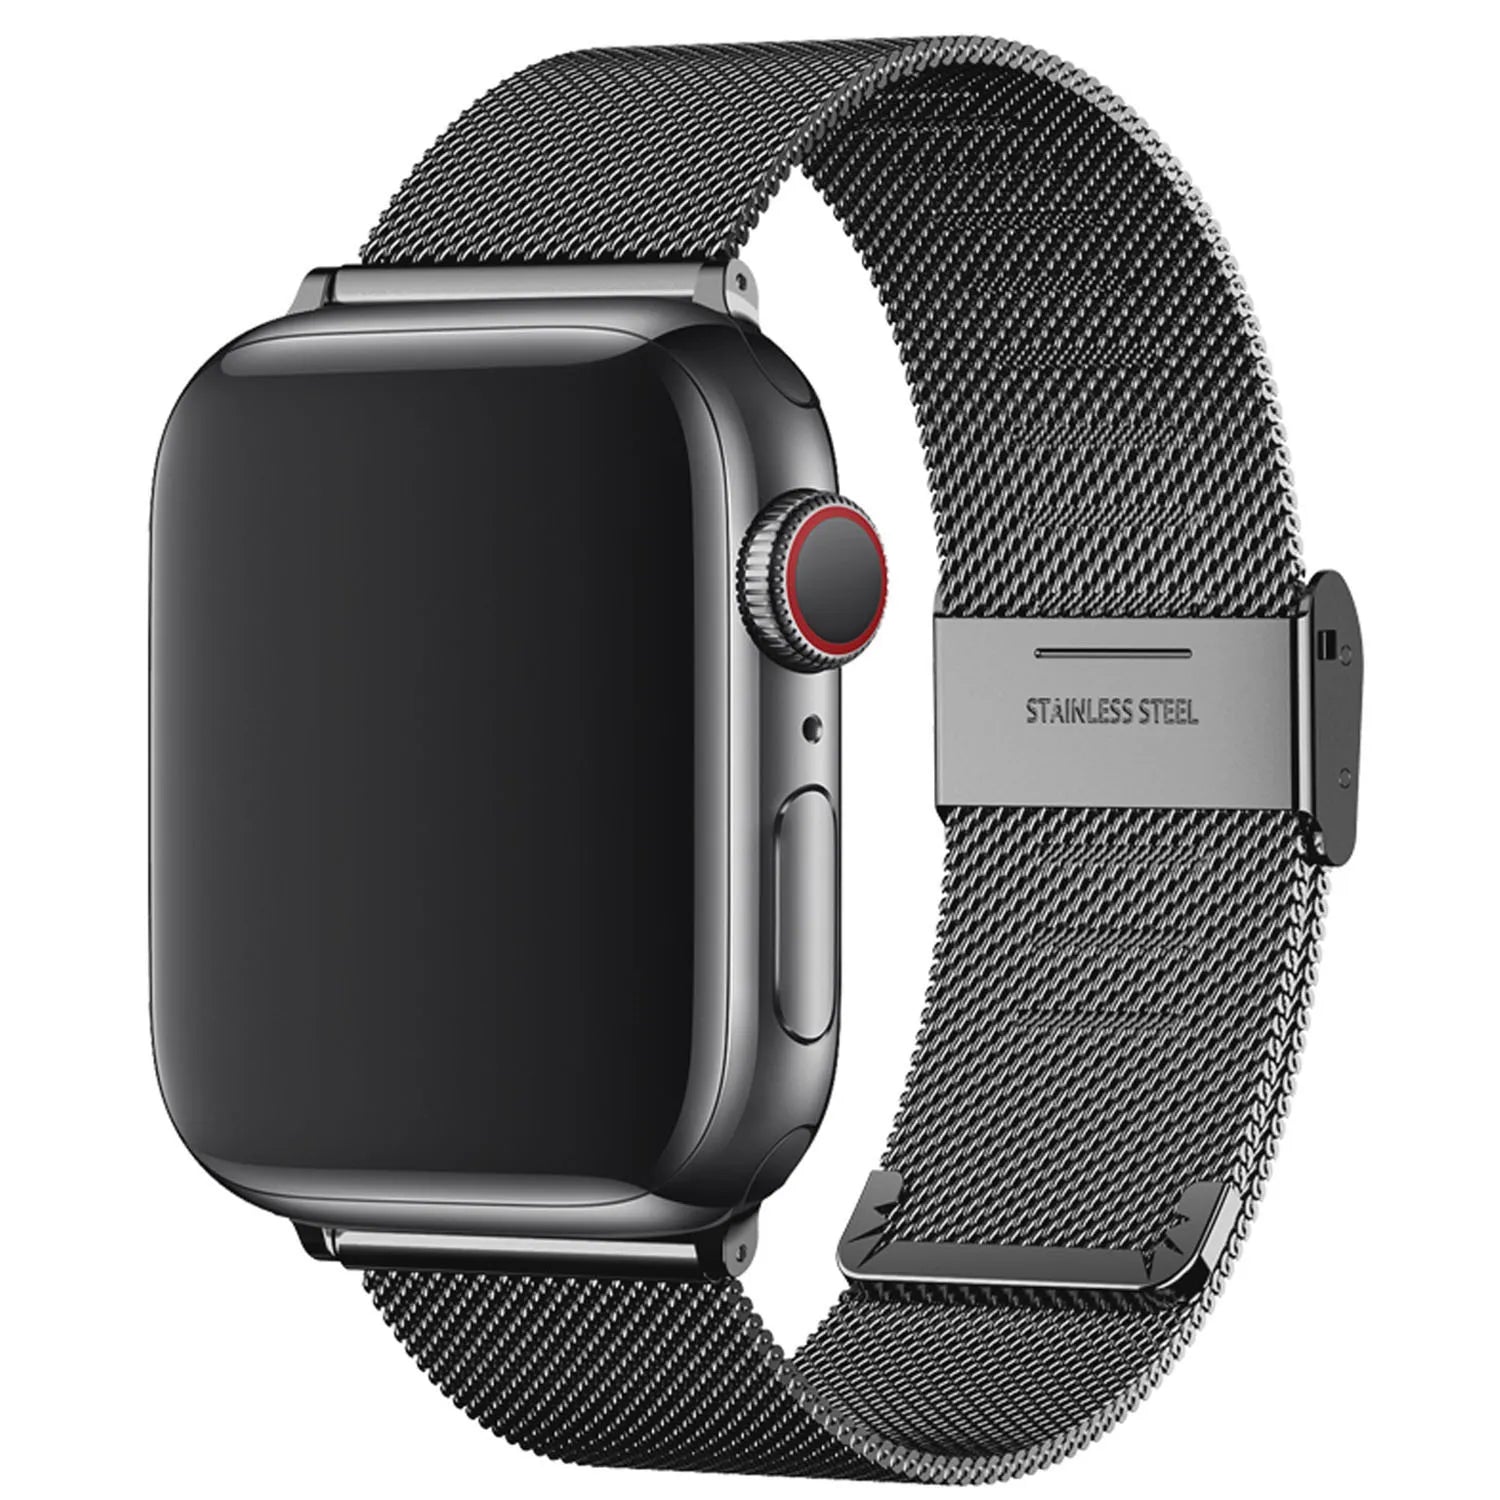 Balerz Milanese Strap For Apple Watch Band Stainless Steel iWatch